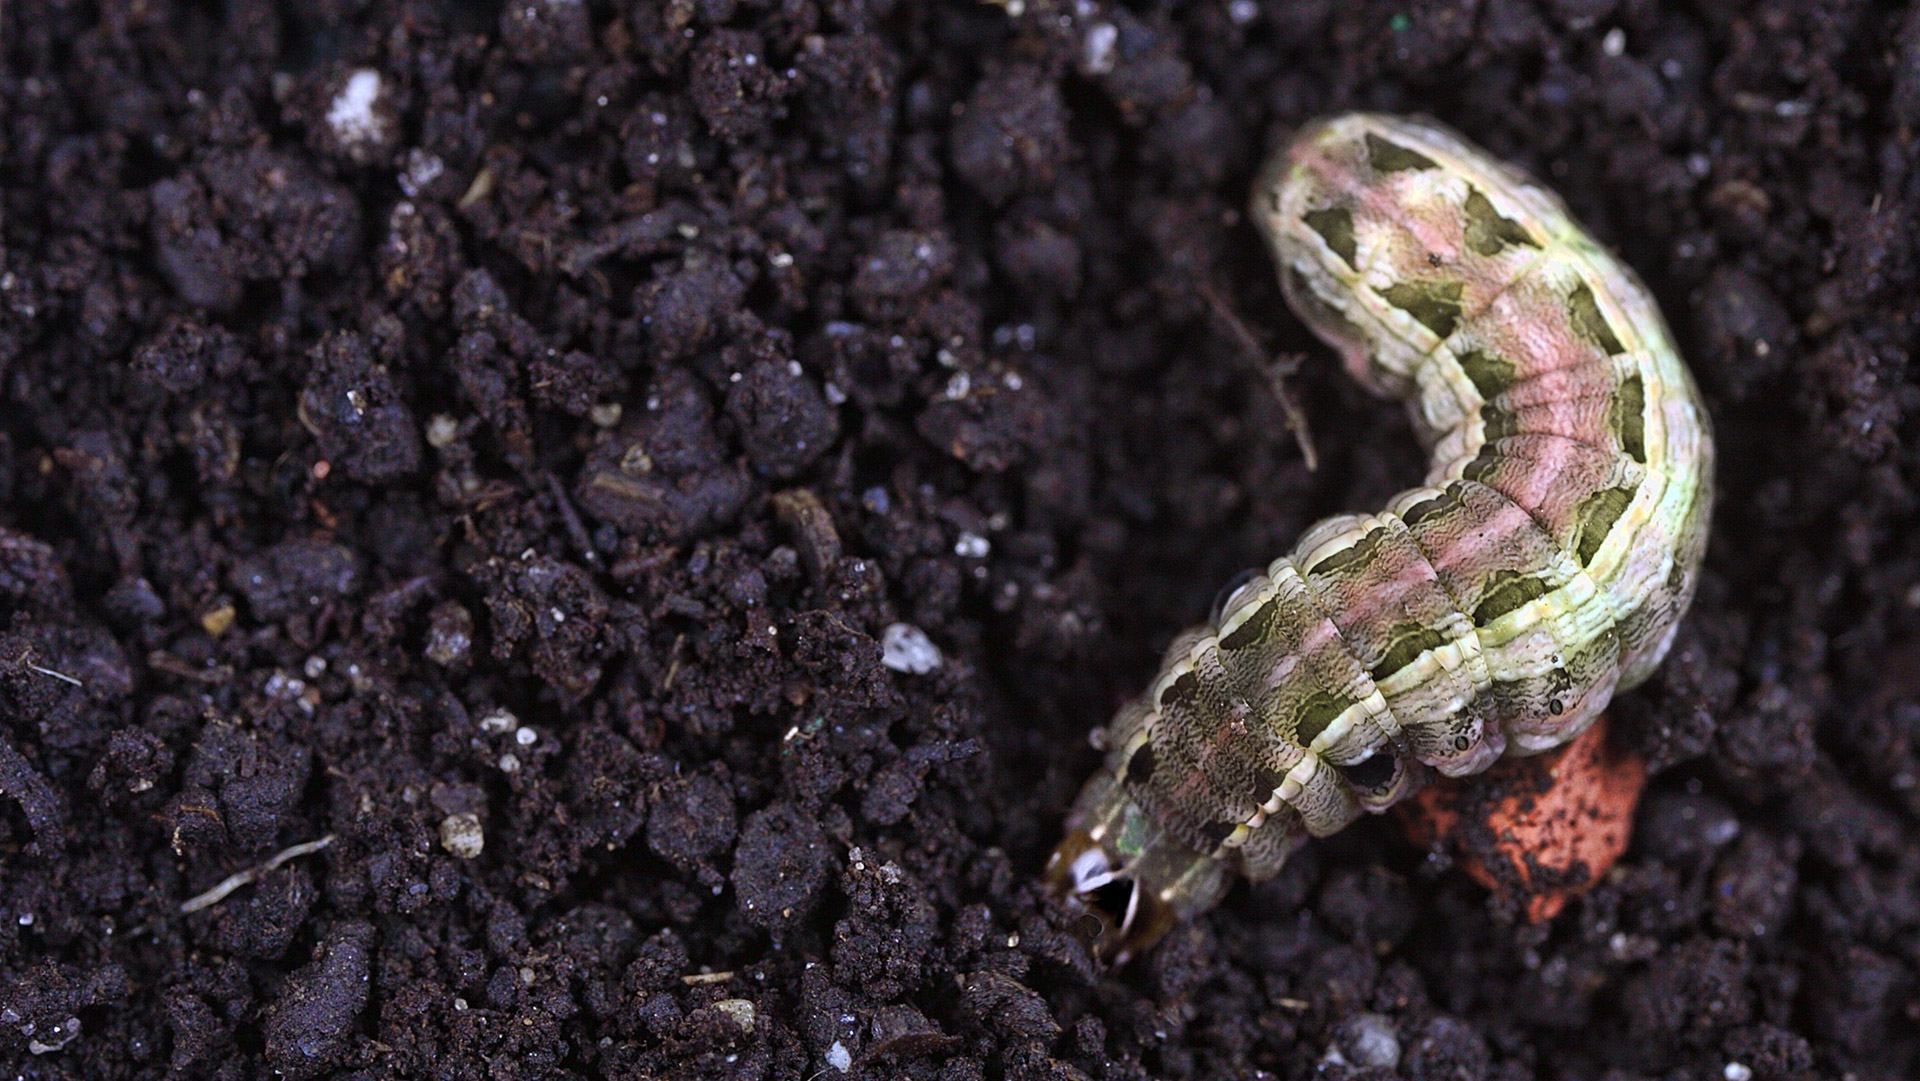 An armyworm found in the dirt by a home in Conway, AR.